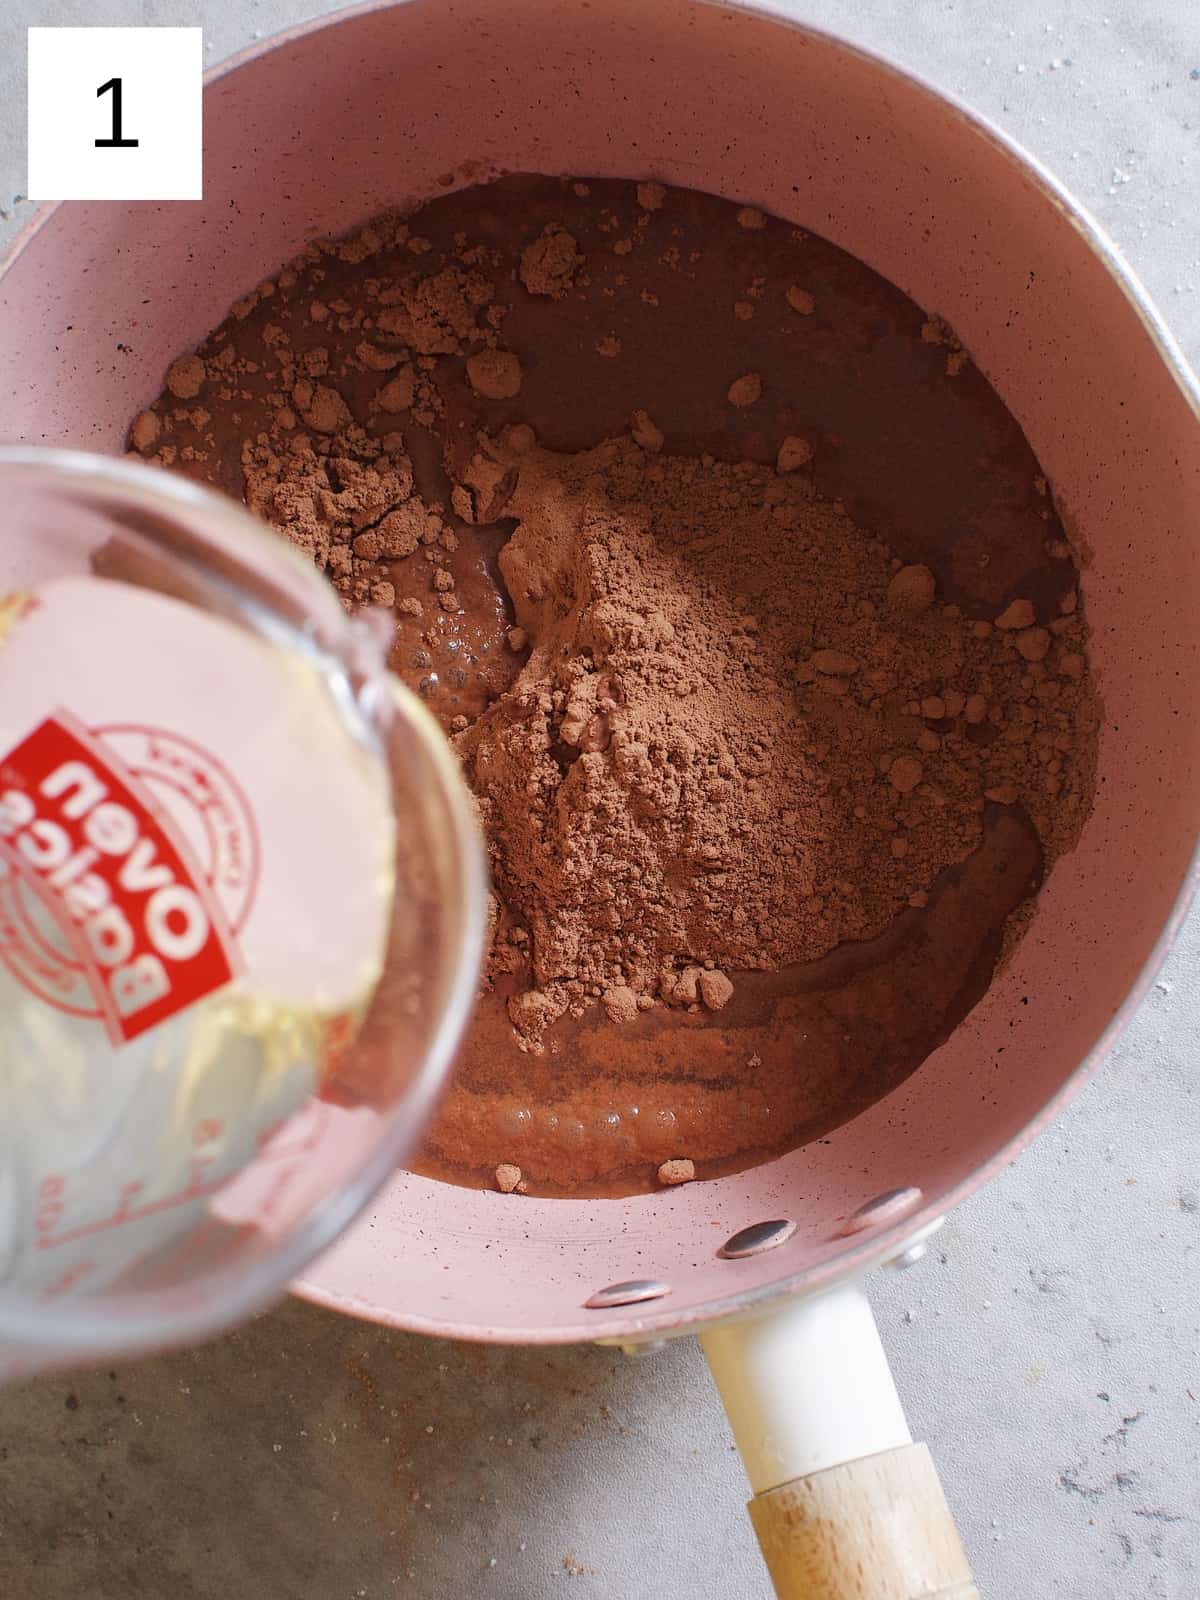 Pouring water onto cocoa powder in a saucepan.